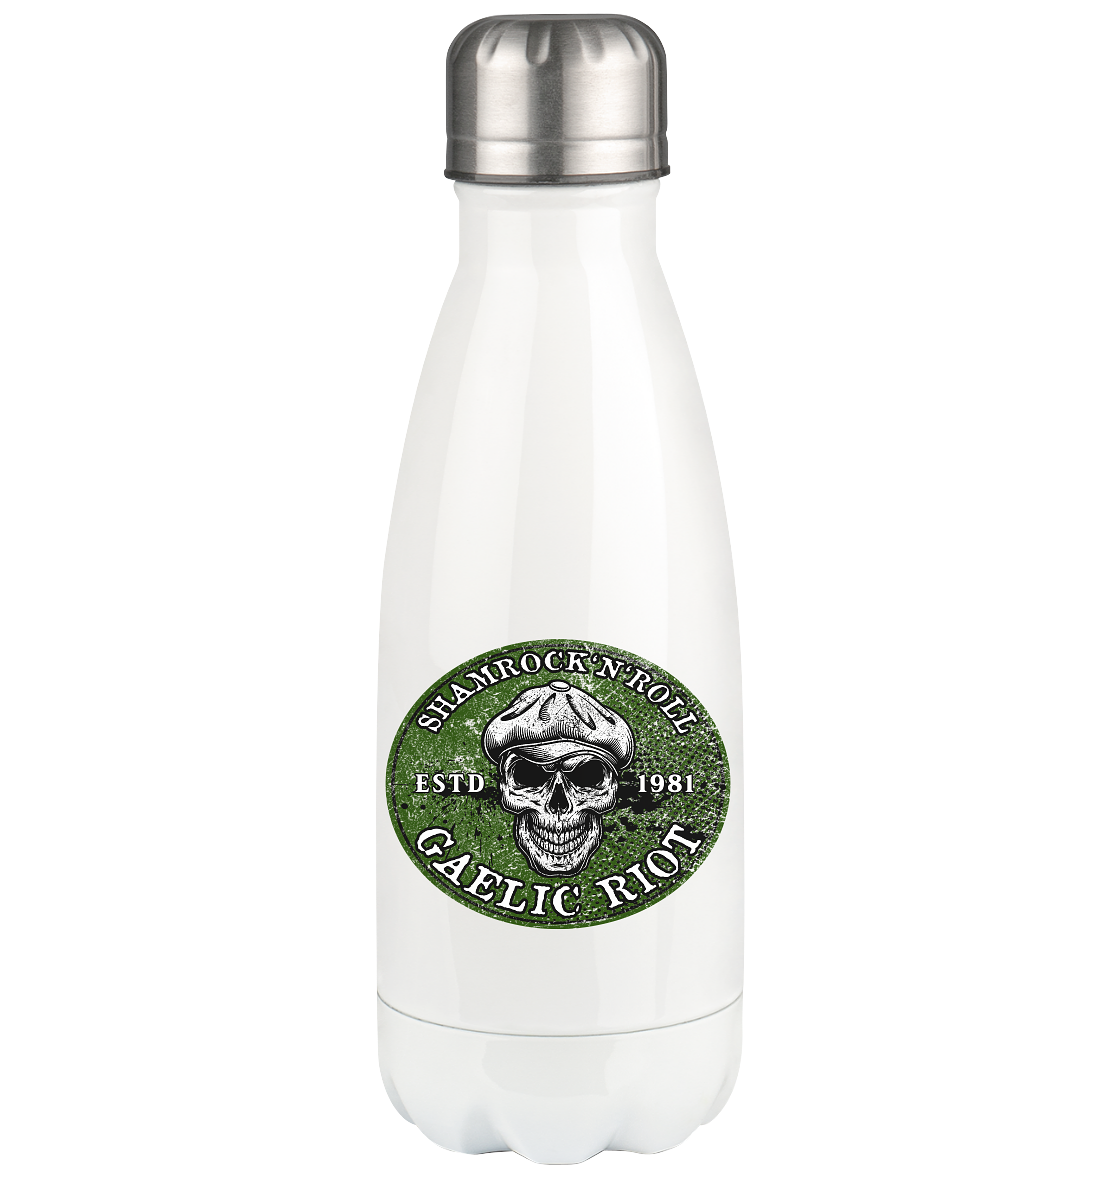 Shamrock And Roll "Skull / Gaelic Riot" - Thermoflasche 350ml